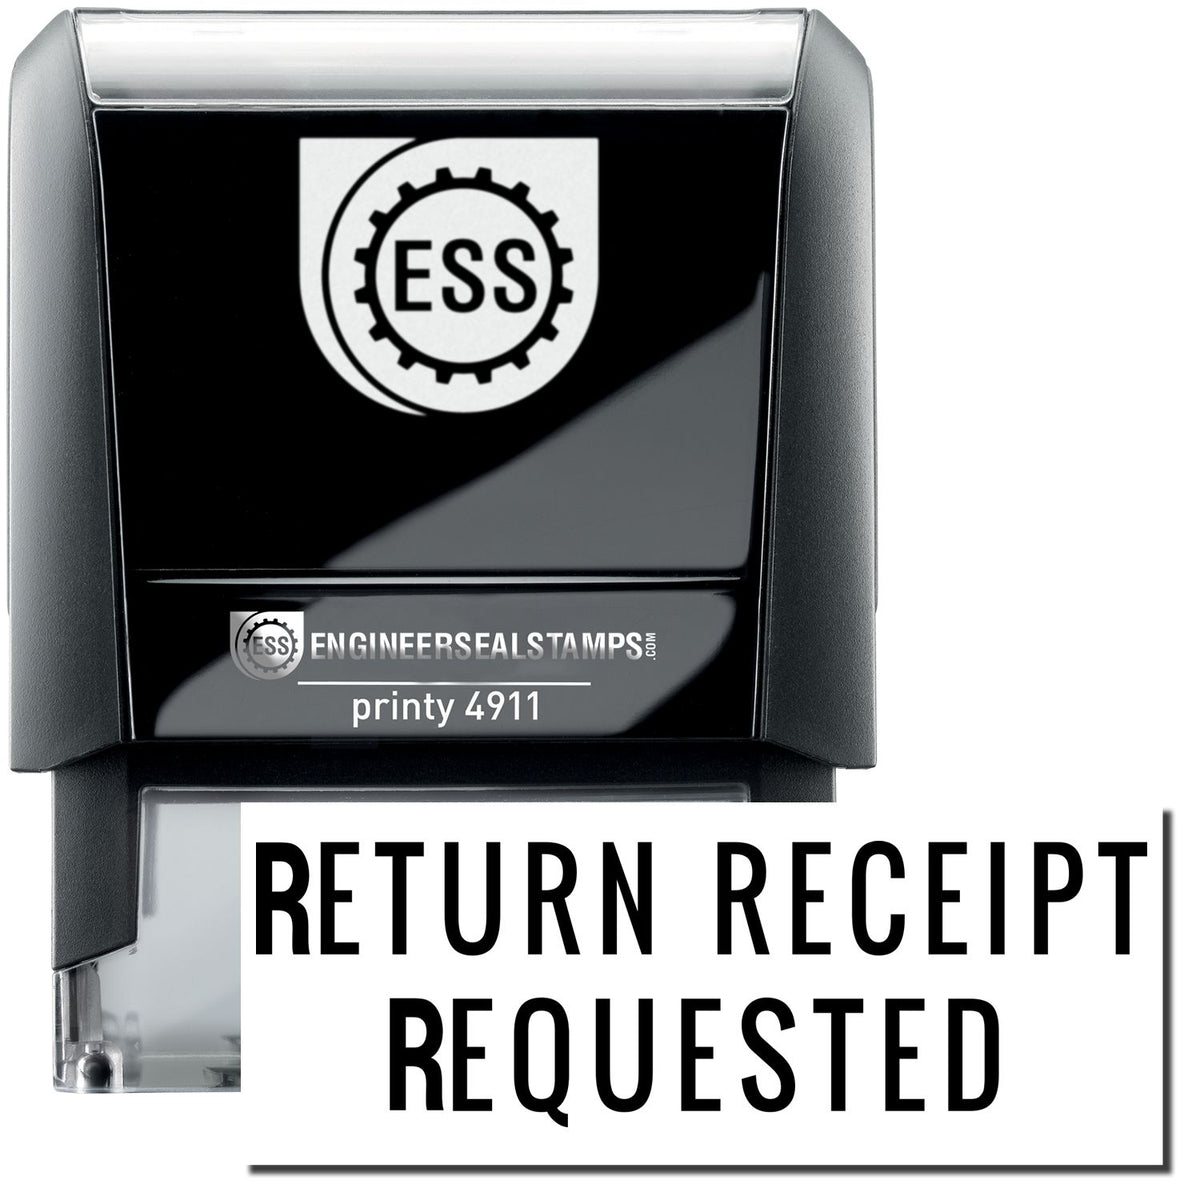 A self-inking stamp with a stamped image showing how the text &quot;RETURN RECEIPT REQUESTED&quot; in a narrow font is displayed after stamping.